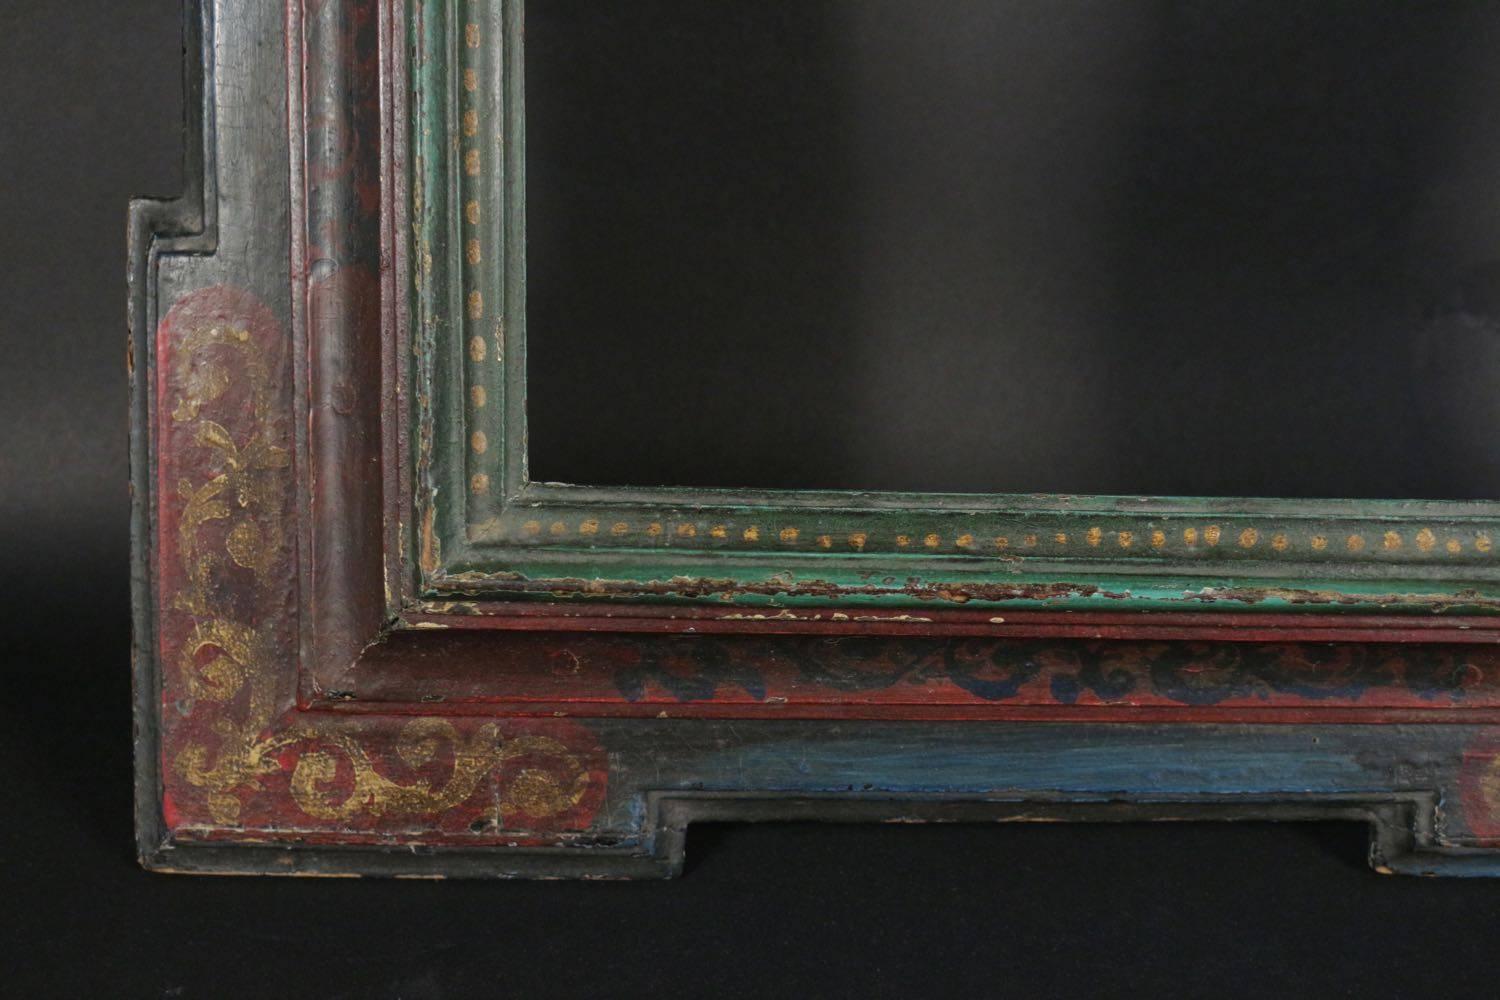 Beautiful Spanish Renaissance frame mounted as mirror, 16th-17th century.
Reverse profile with decorative scrolls in corners.
Measures: Sight size: 34 cm x 25 cm.
Overall size: 54 cm x 45 cm.